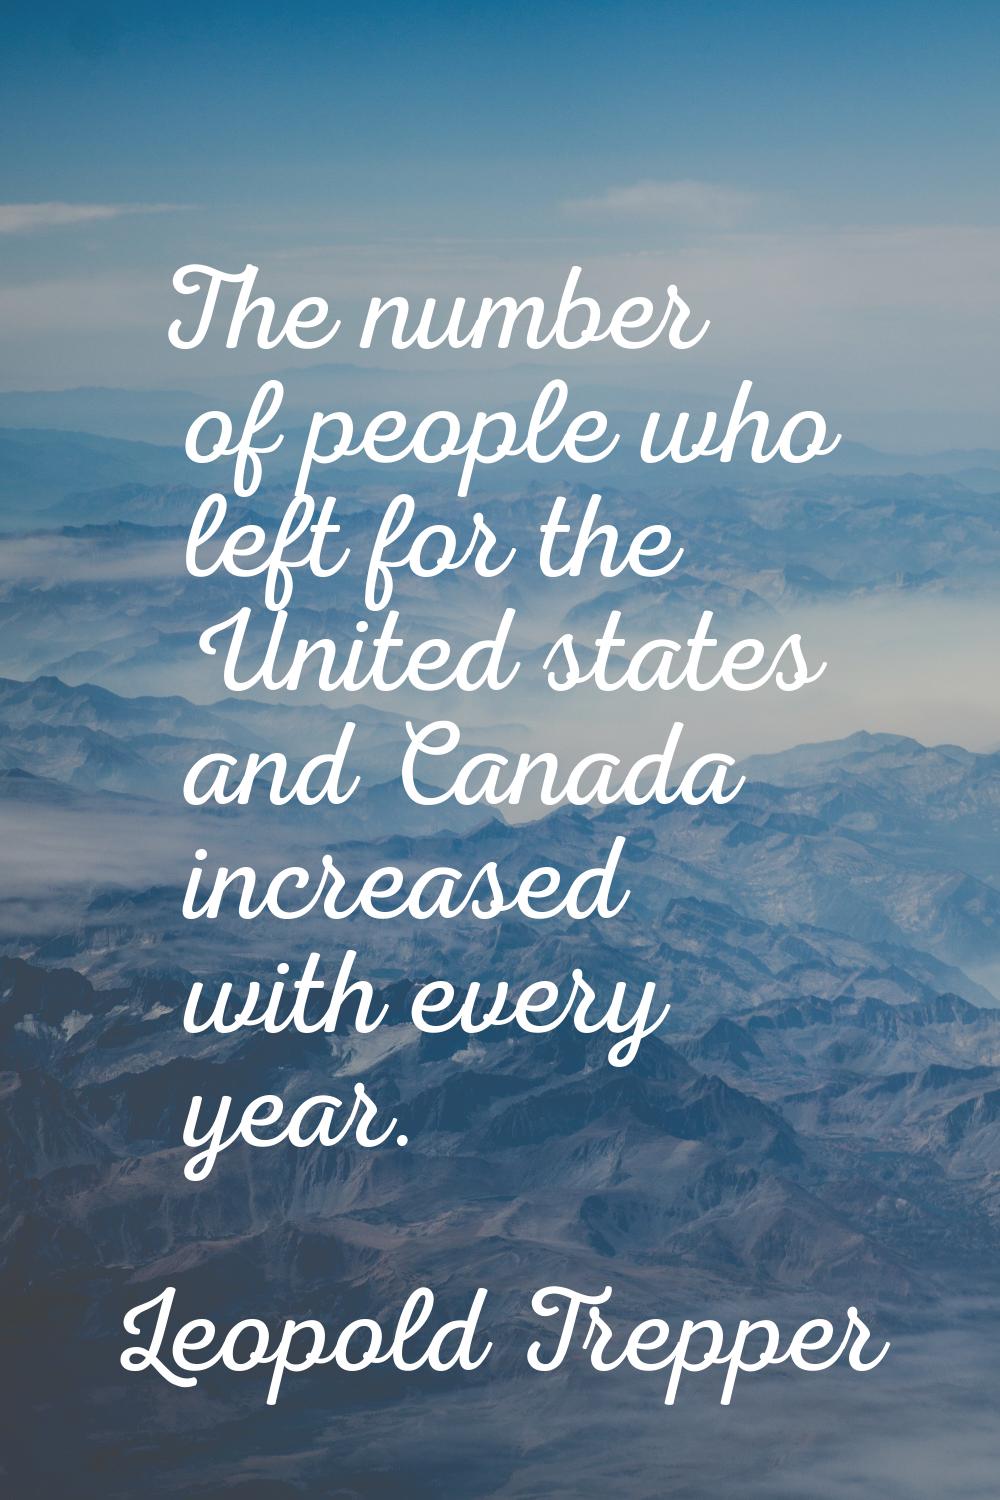 The number of people who left for the United states and Canada increased with every year.